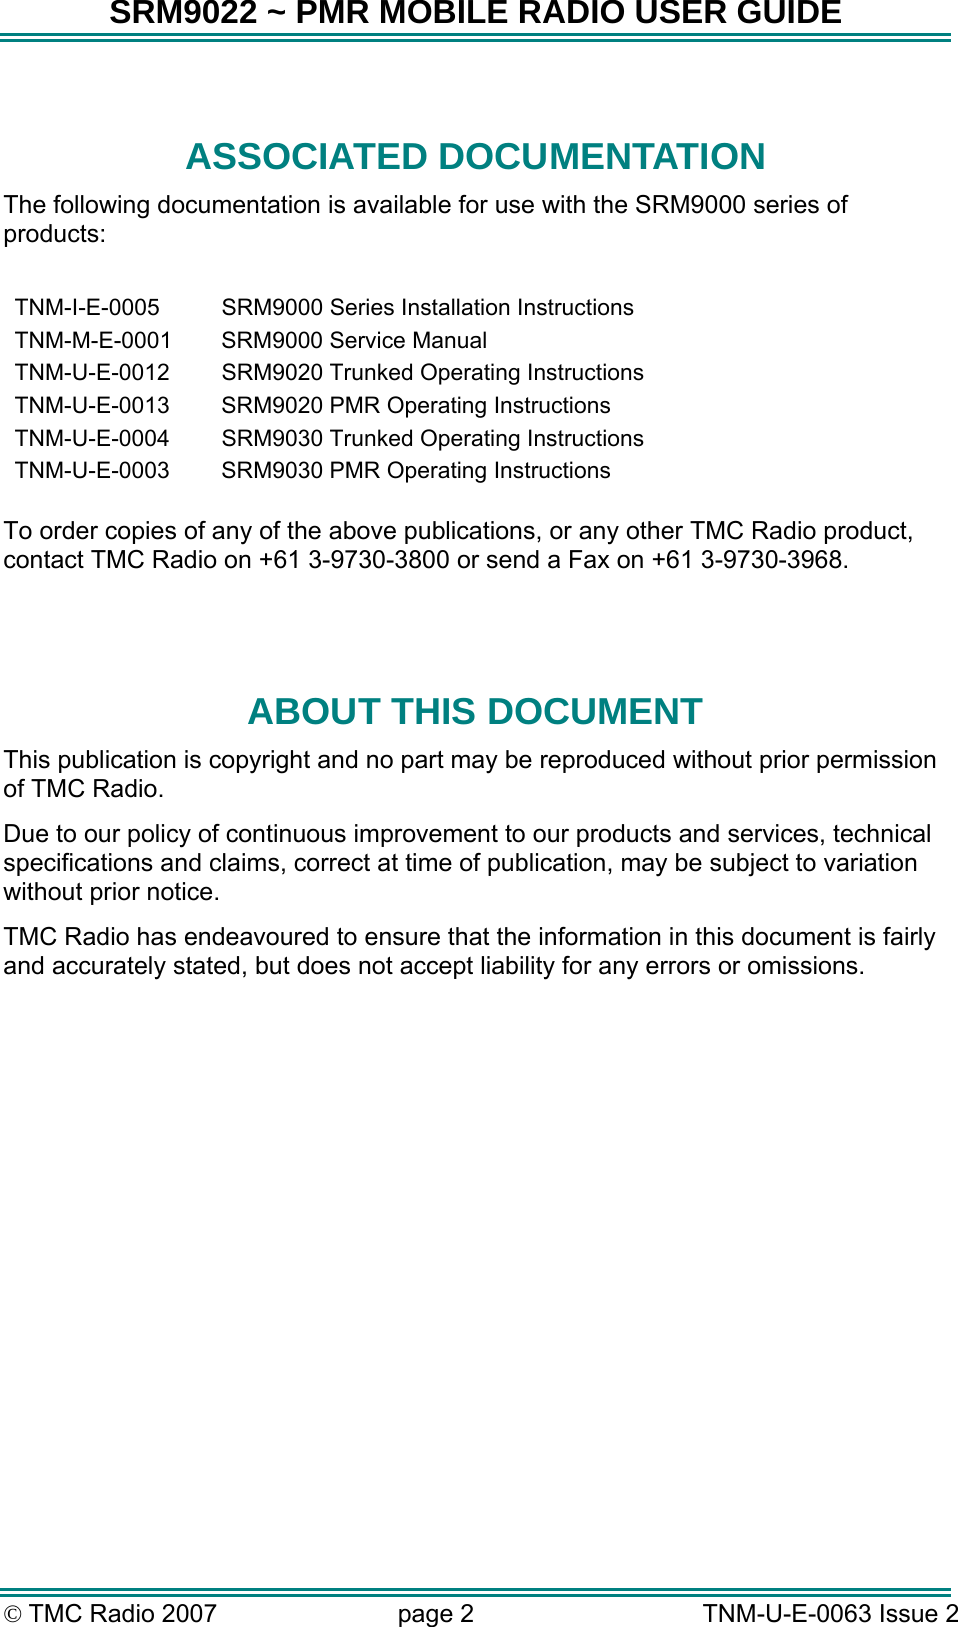 SRM9022 ~ PMR MOBILE RADIO USER GUIDE © TMC Radio 2007  page 2   TNM-U-E-0063 Issue 2  ASSOCIATED DOCUMENTATION The following documentation is available for use with the SRM9000 series of products:  TNM-I-E-0005  SRM9000 Series Installation Instructions TNM-M-E-0001  SRM9000 Service Manual TNM-U-E-0012  SRM9020 Trunked Operating Instructions TNM-U-E-0013  SRM9020 PMR Operating Instructions TNM-U-E-0004  SRM9030 Trunked Operating Instructions TNM-U-E-0003  SRM9030 PMR Operating Instructions   To order copies of any of the above publications, or any other TMC Radio product, contact TMC Radio on +61 3-9730-3800 or send a Fax on +61 3-9730-3968.   ABOUT THIS DOCUMENT This publication is copyright and no part may be reproduced without prior permission of TMC Radio. Due to our policy of continuous improvement to our products and services, technical specifications and claims, correct at time of publication, may be subject to variation without prior notice.   TMC Radio has endeavoured to ensure that the information in this document is fairly and accurately stated, but does not accept liability for any errors or omissions.    